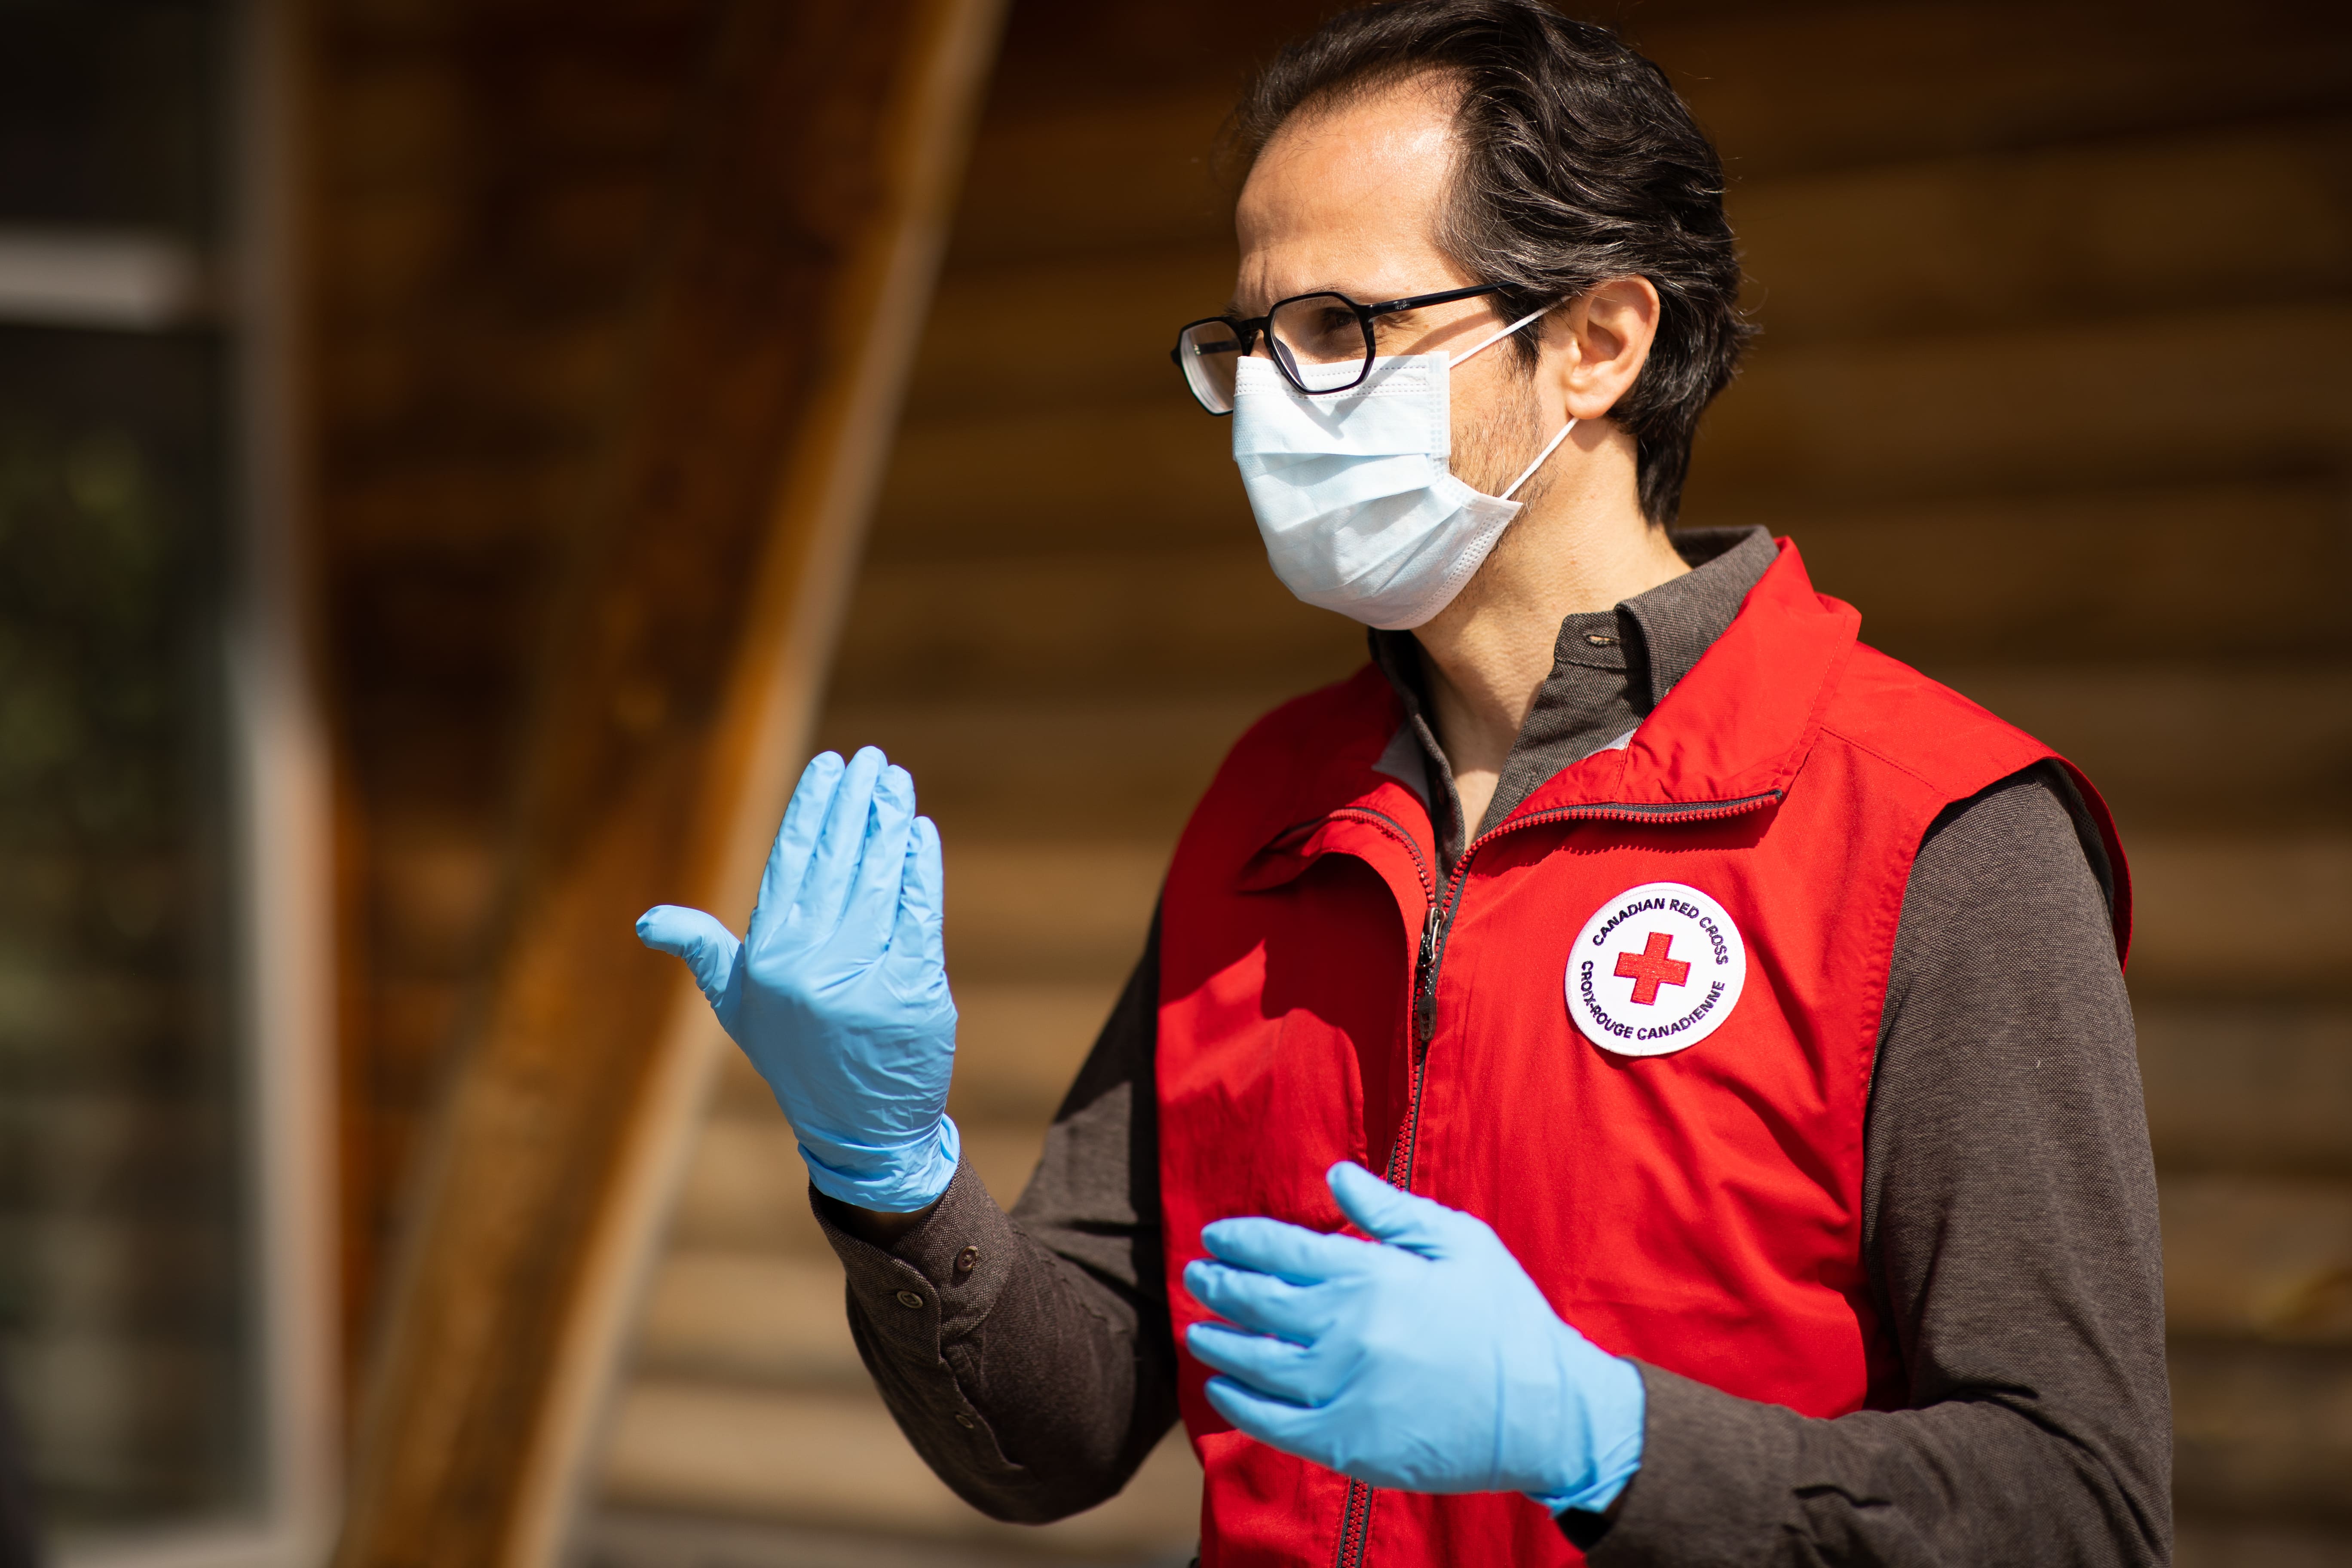 A volunteer wearing a Canadian Red Cross vest, facial mask, and gloves directs others to approach.